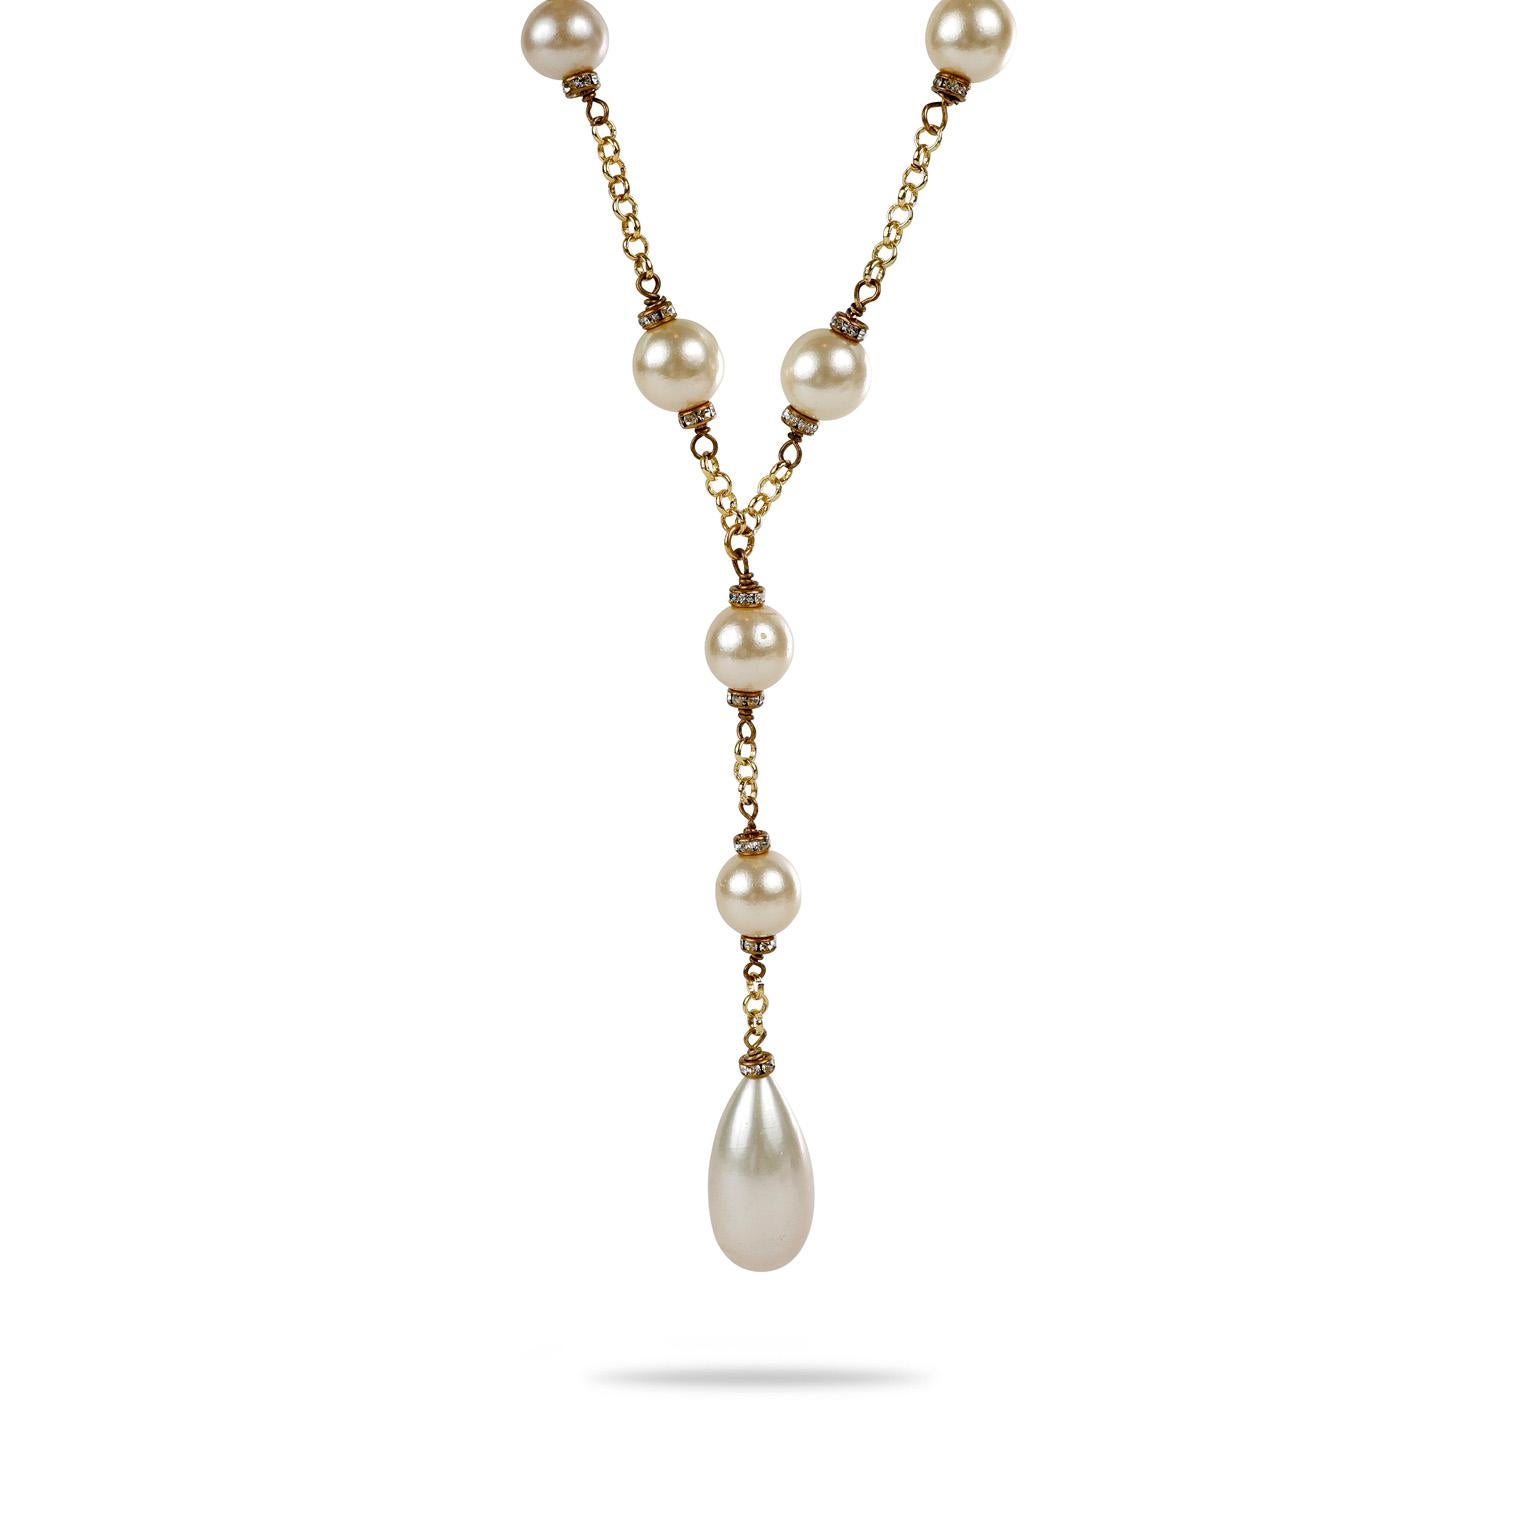 This authentic Chanel Pearl Lariat Necklace is in excellent vintage condition from the 1980’s.  24 karat gold plated chain with faux pearls anchored by tiny crystals.  A large tear drop shaped faux pearl dangles delicately down the center. Made in